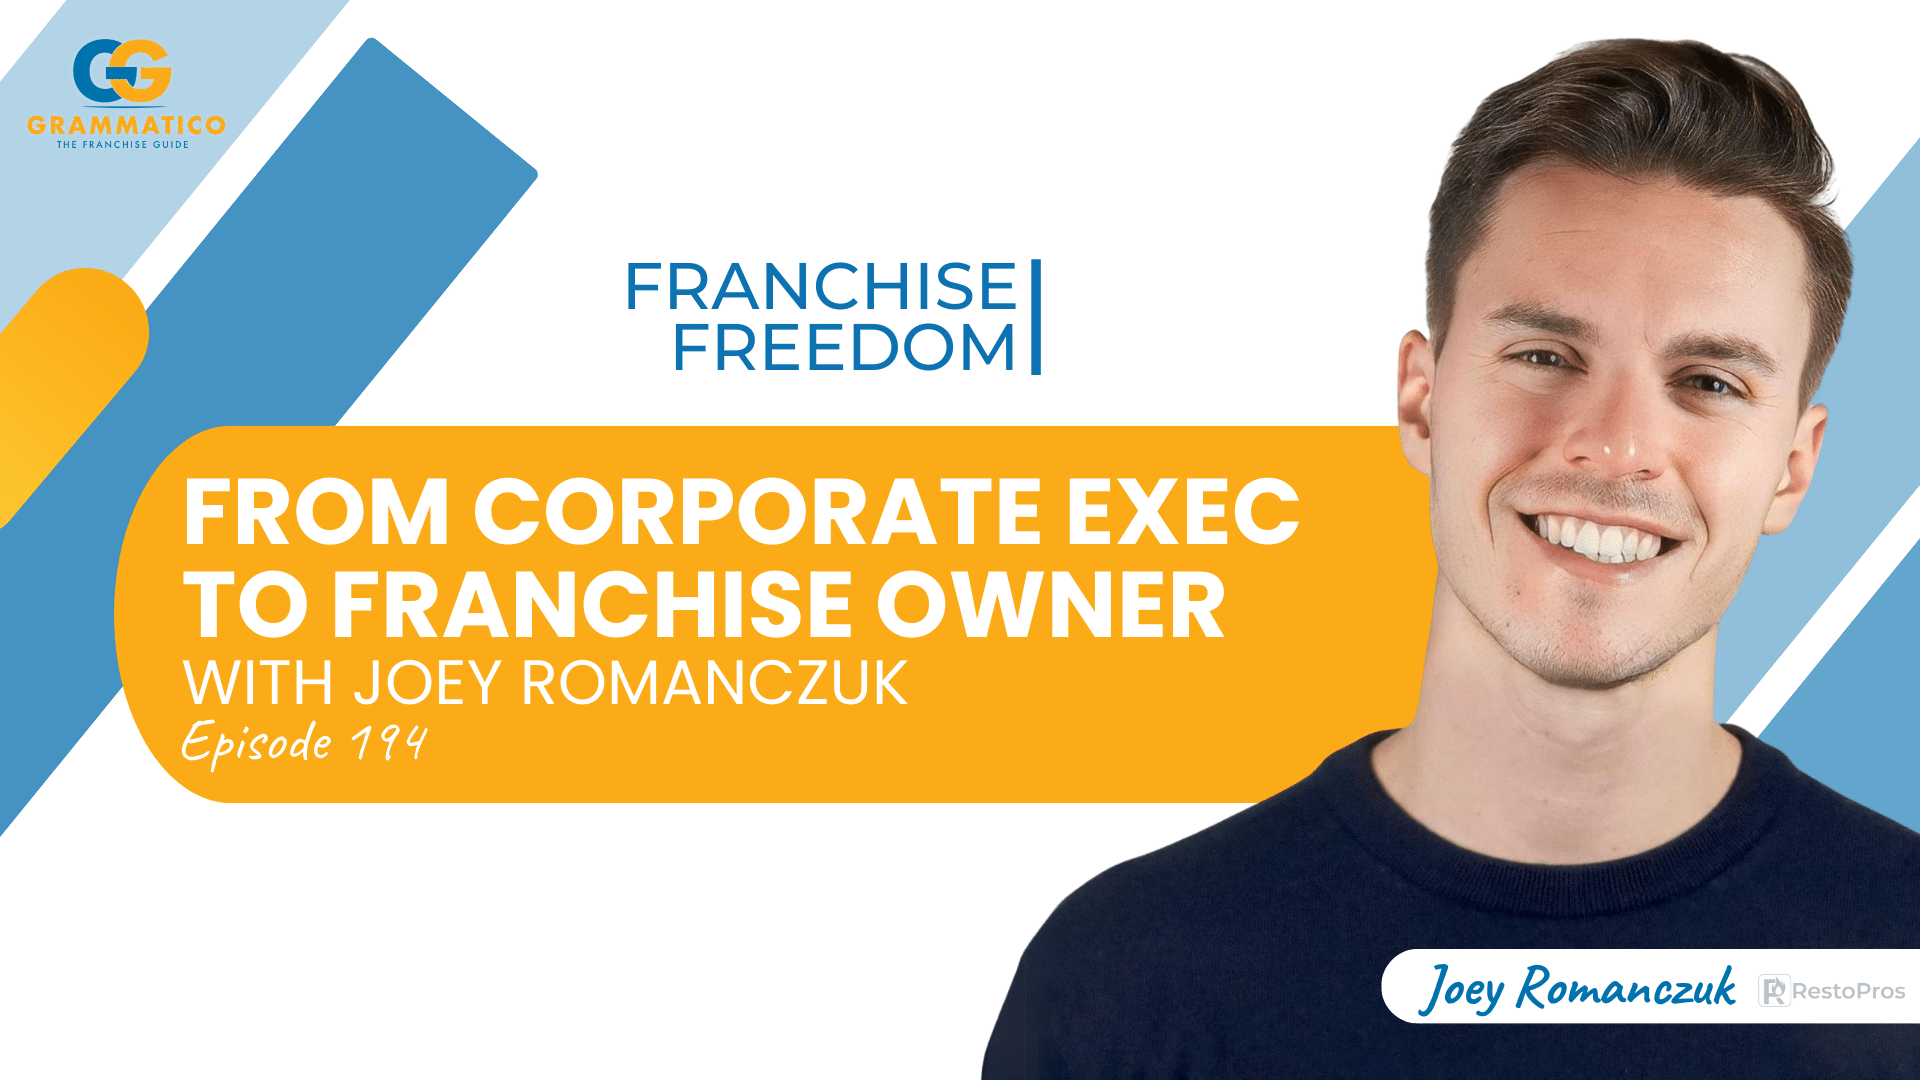 From Corporate Exec to Franchise Owner with Joey Romanczuk